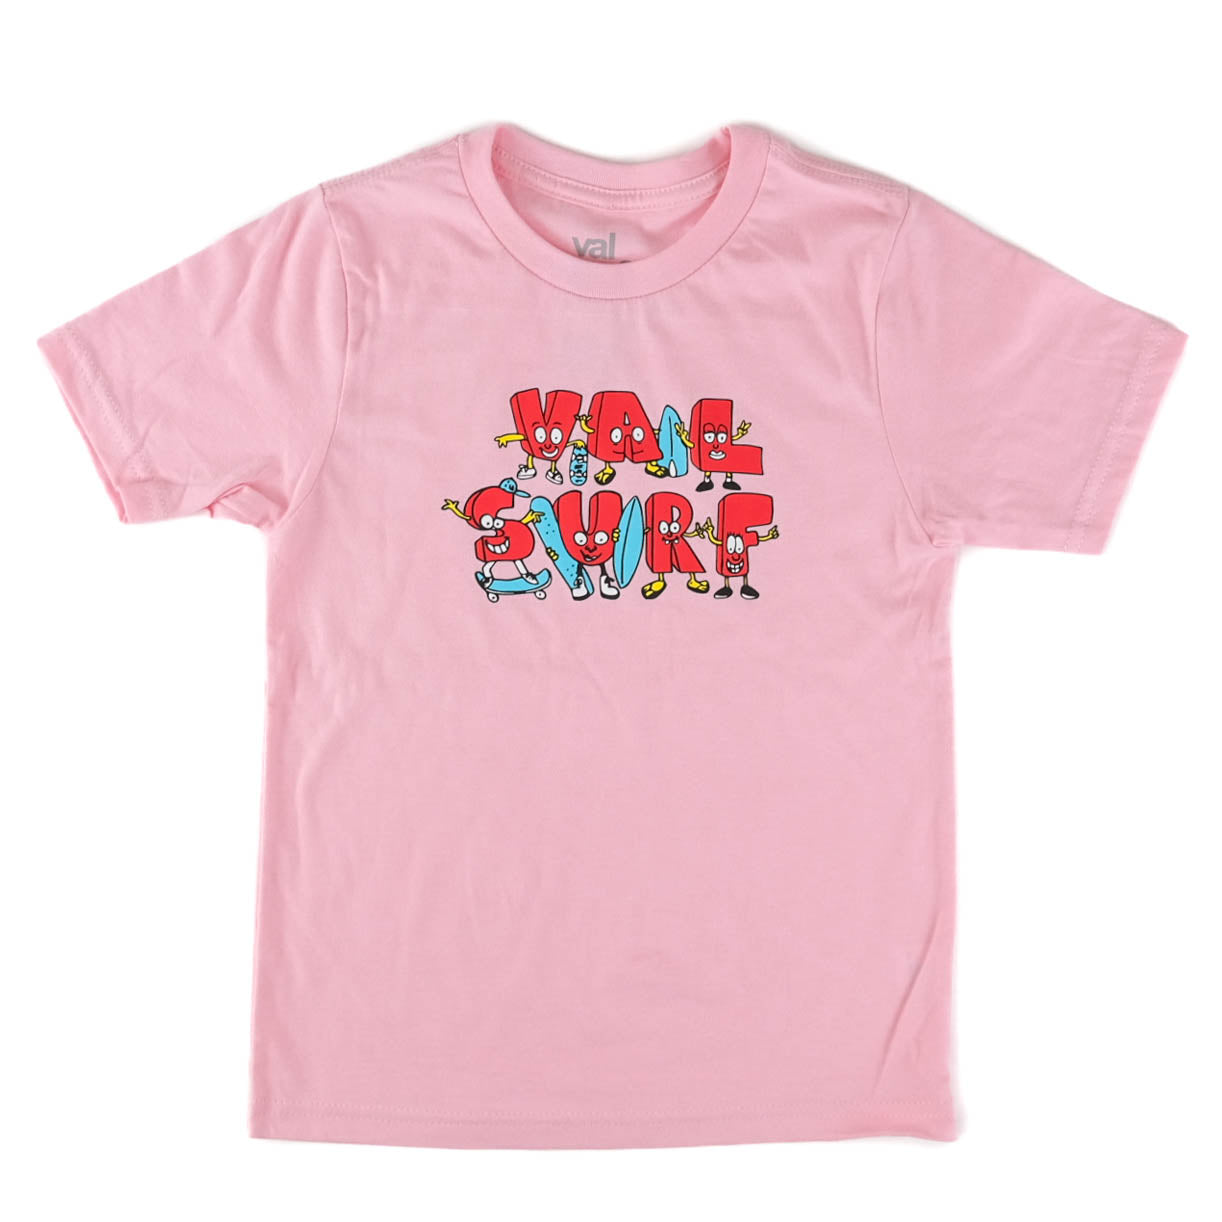 Summer Glaboe Youth Tee - Light Pink